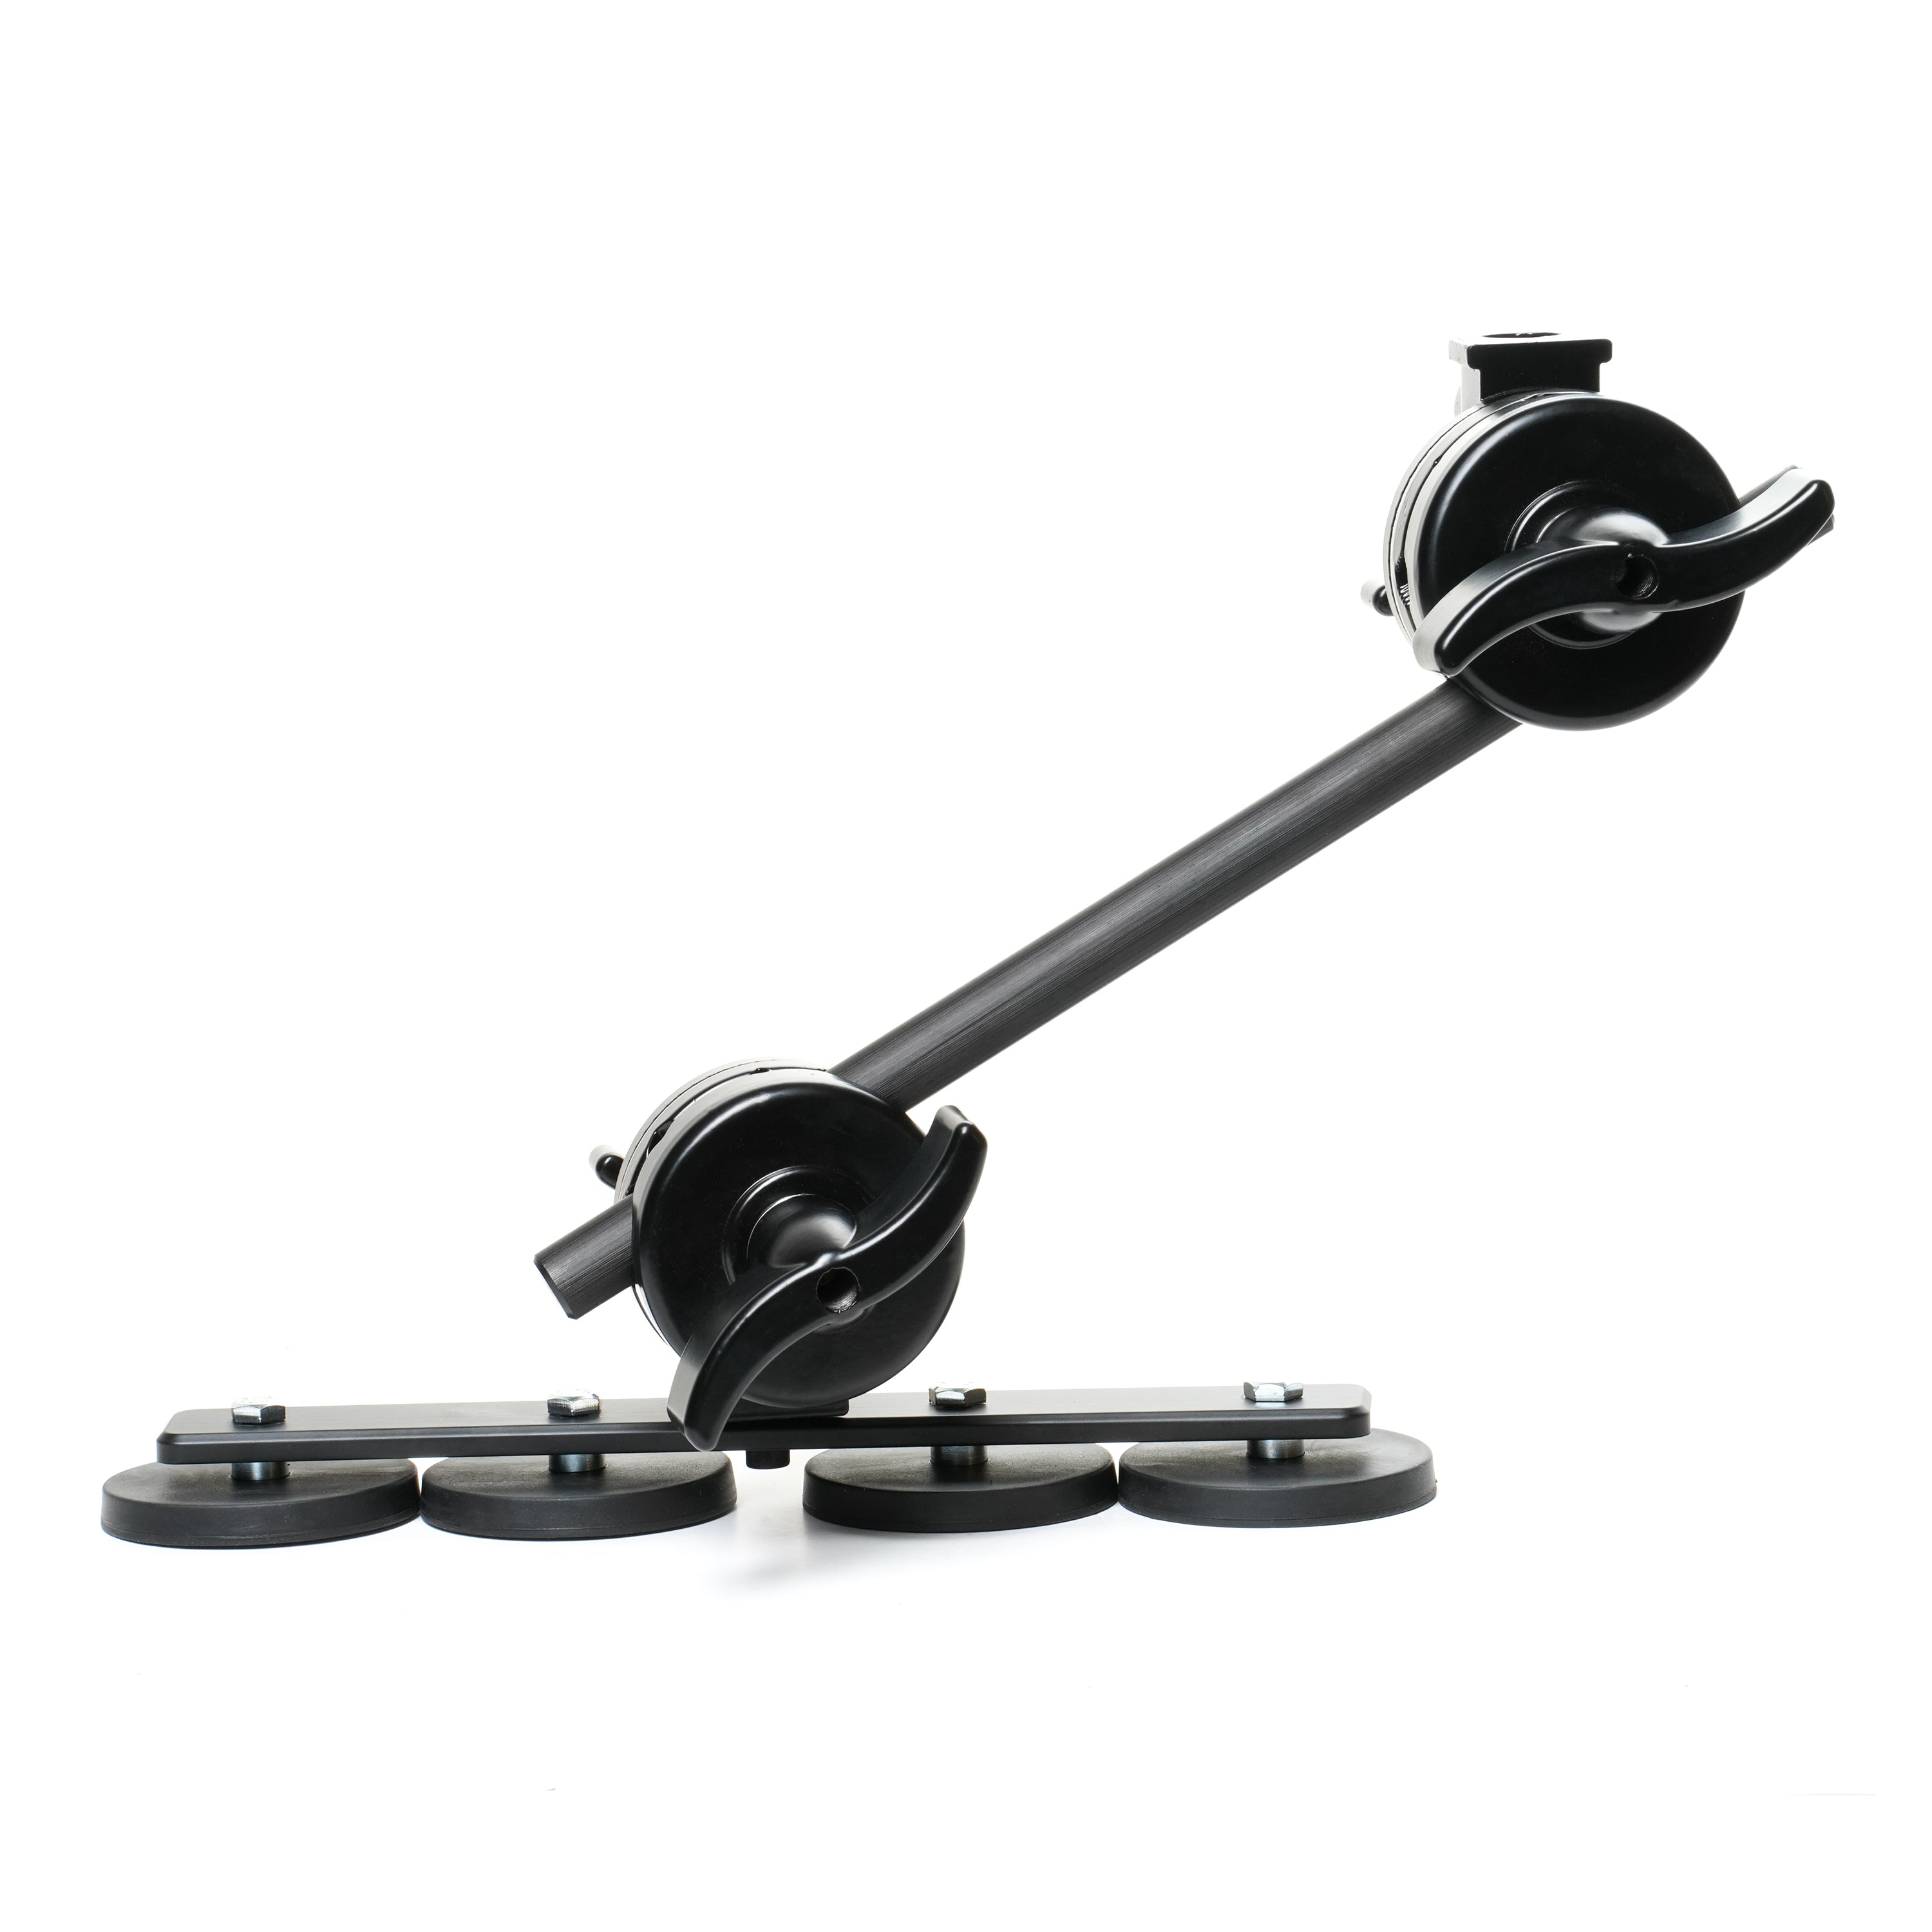 Articulating Triple Magnet Arms with Grip Heads (Set of 3 Arms)